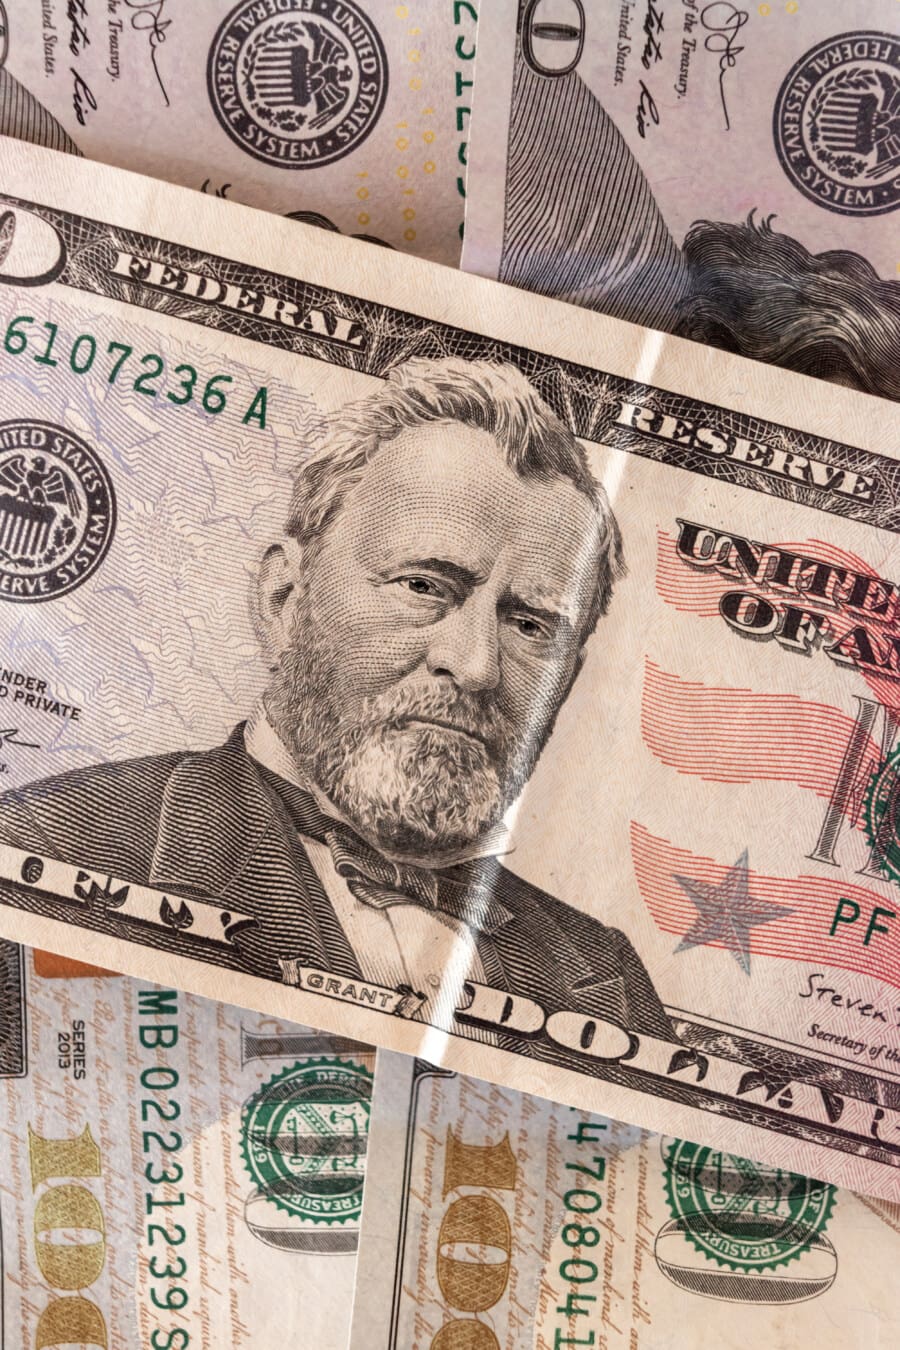 50$ dollars, Hiram Ulysses Grant, cash, United States of America, banknote, paper money, close-up, detail, currency, money